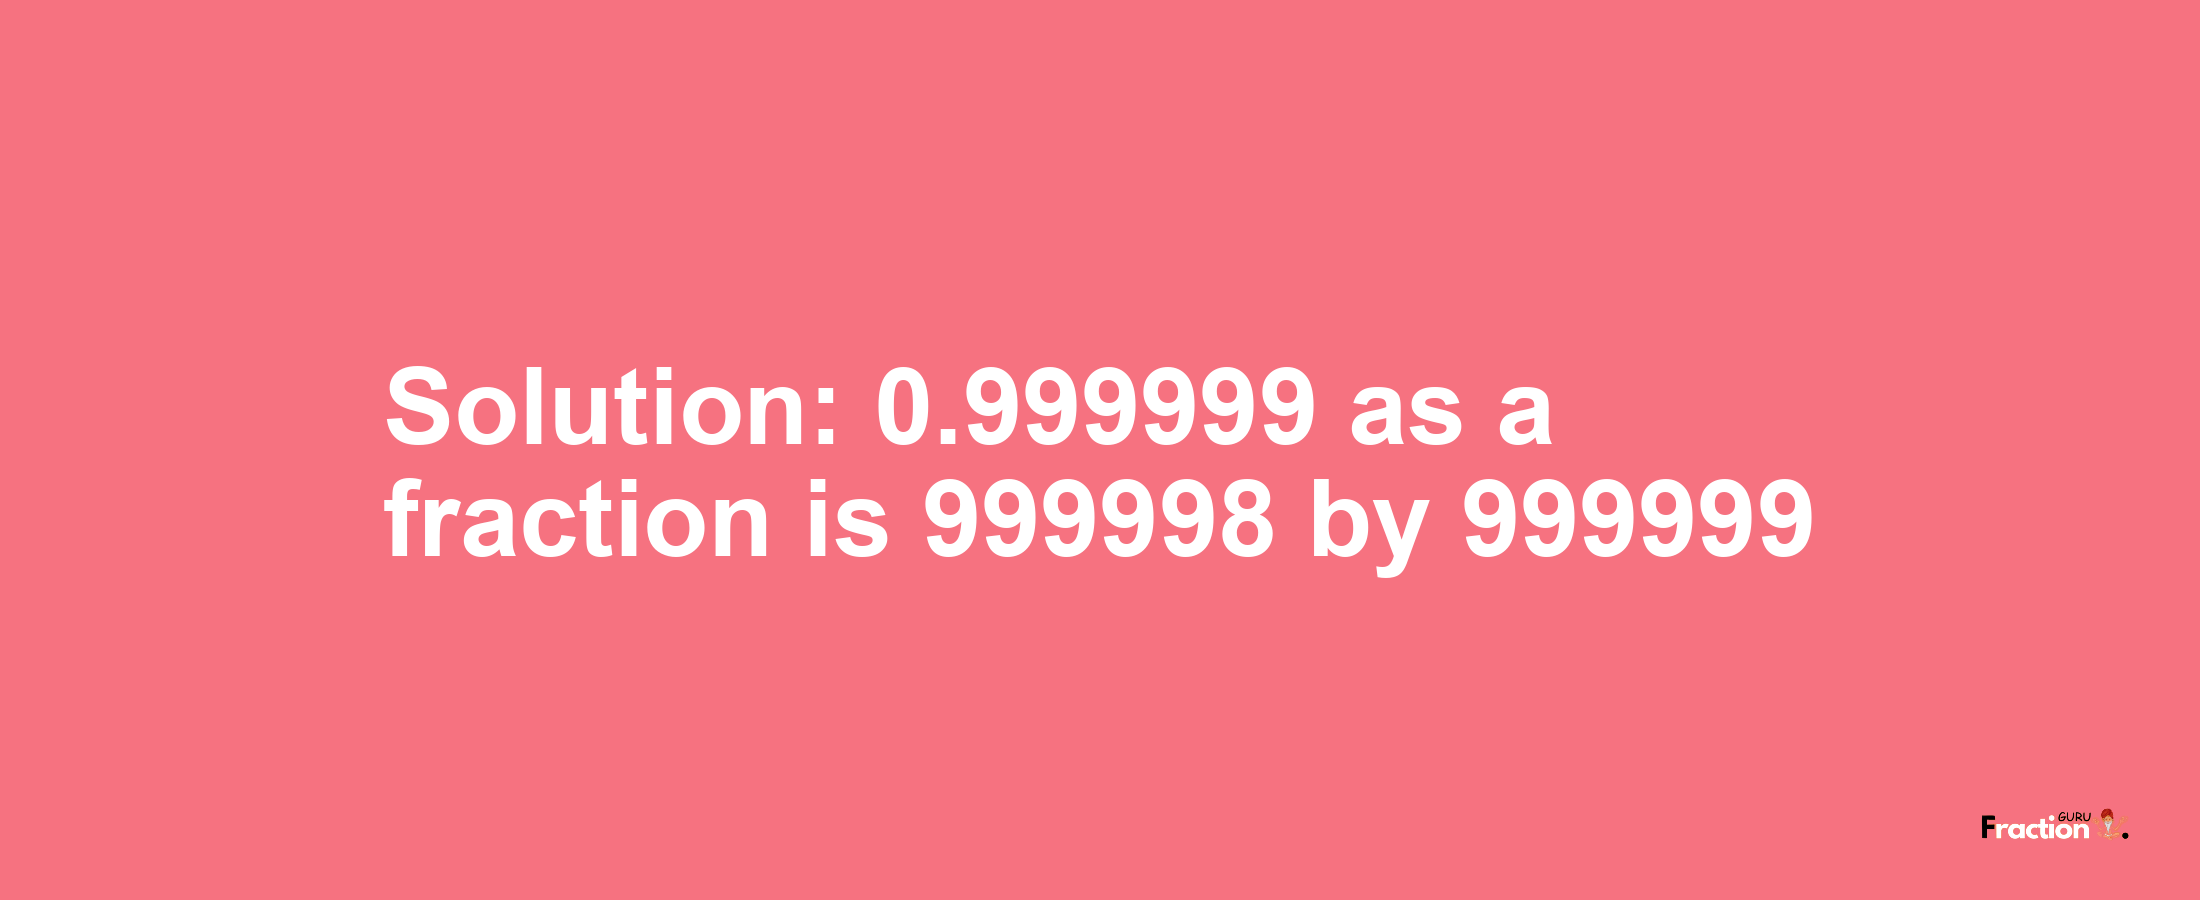 Solution:0.999999 as a fraction is 999998/999999